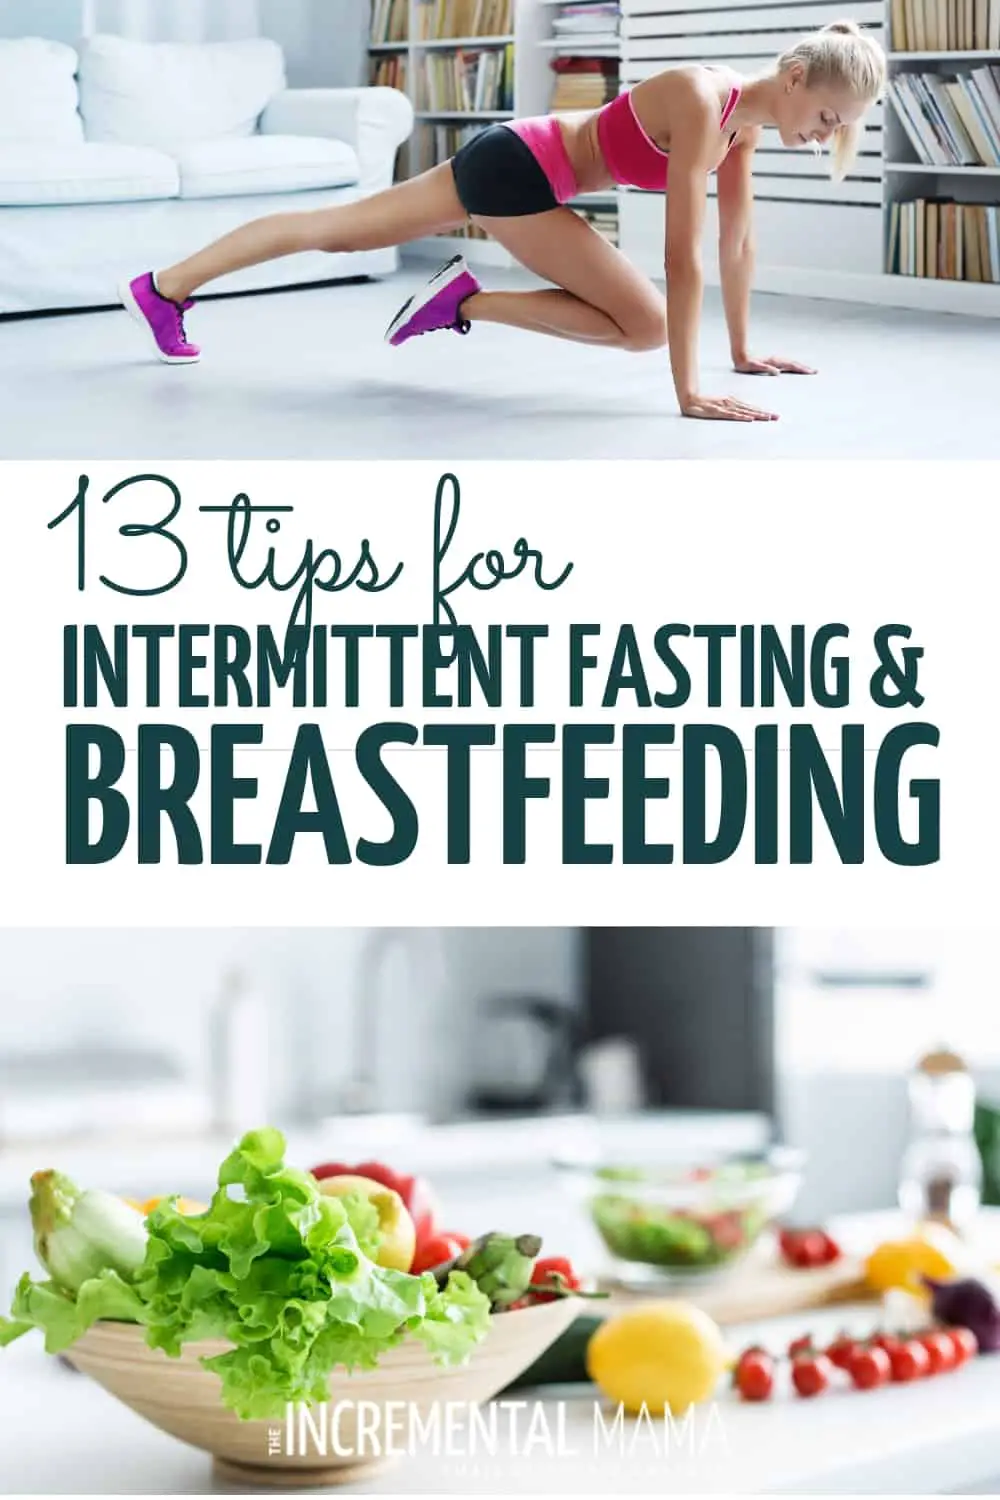 13 Tips for Intermittent Fasting While Breastfeeding